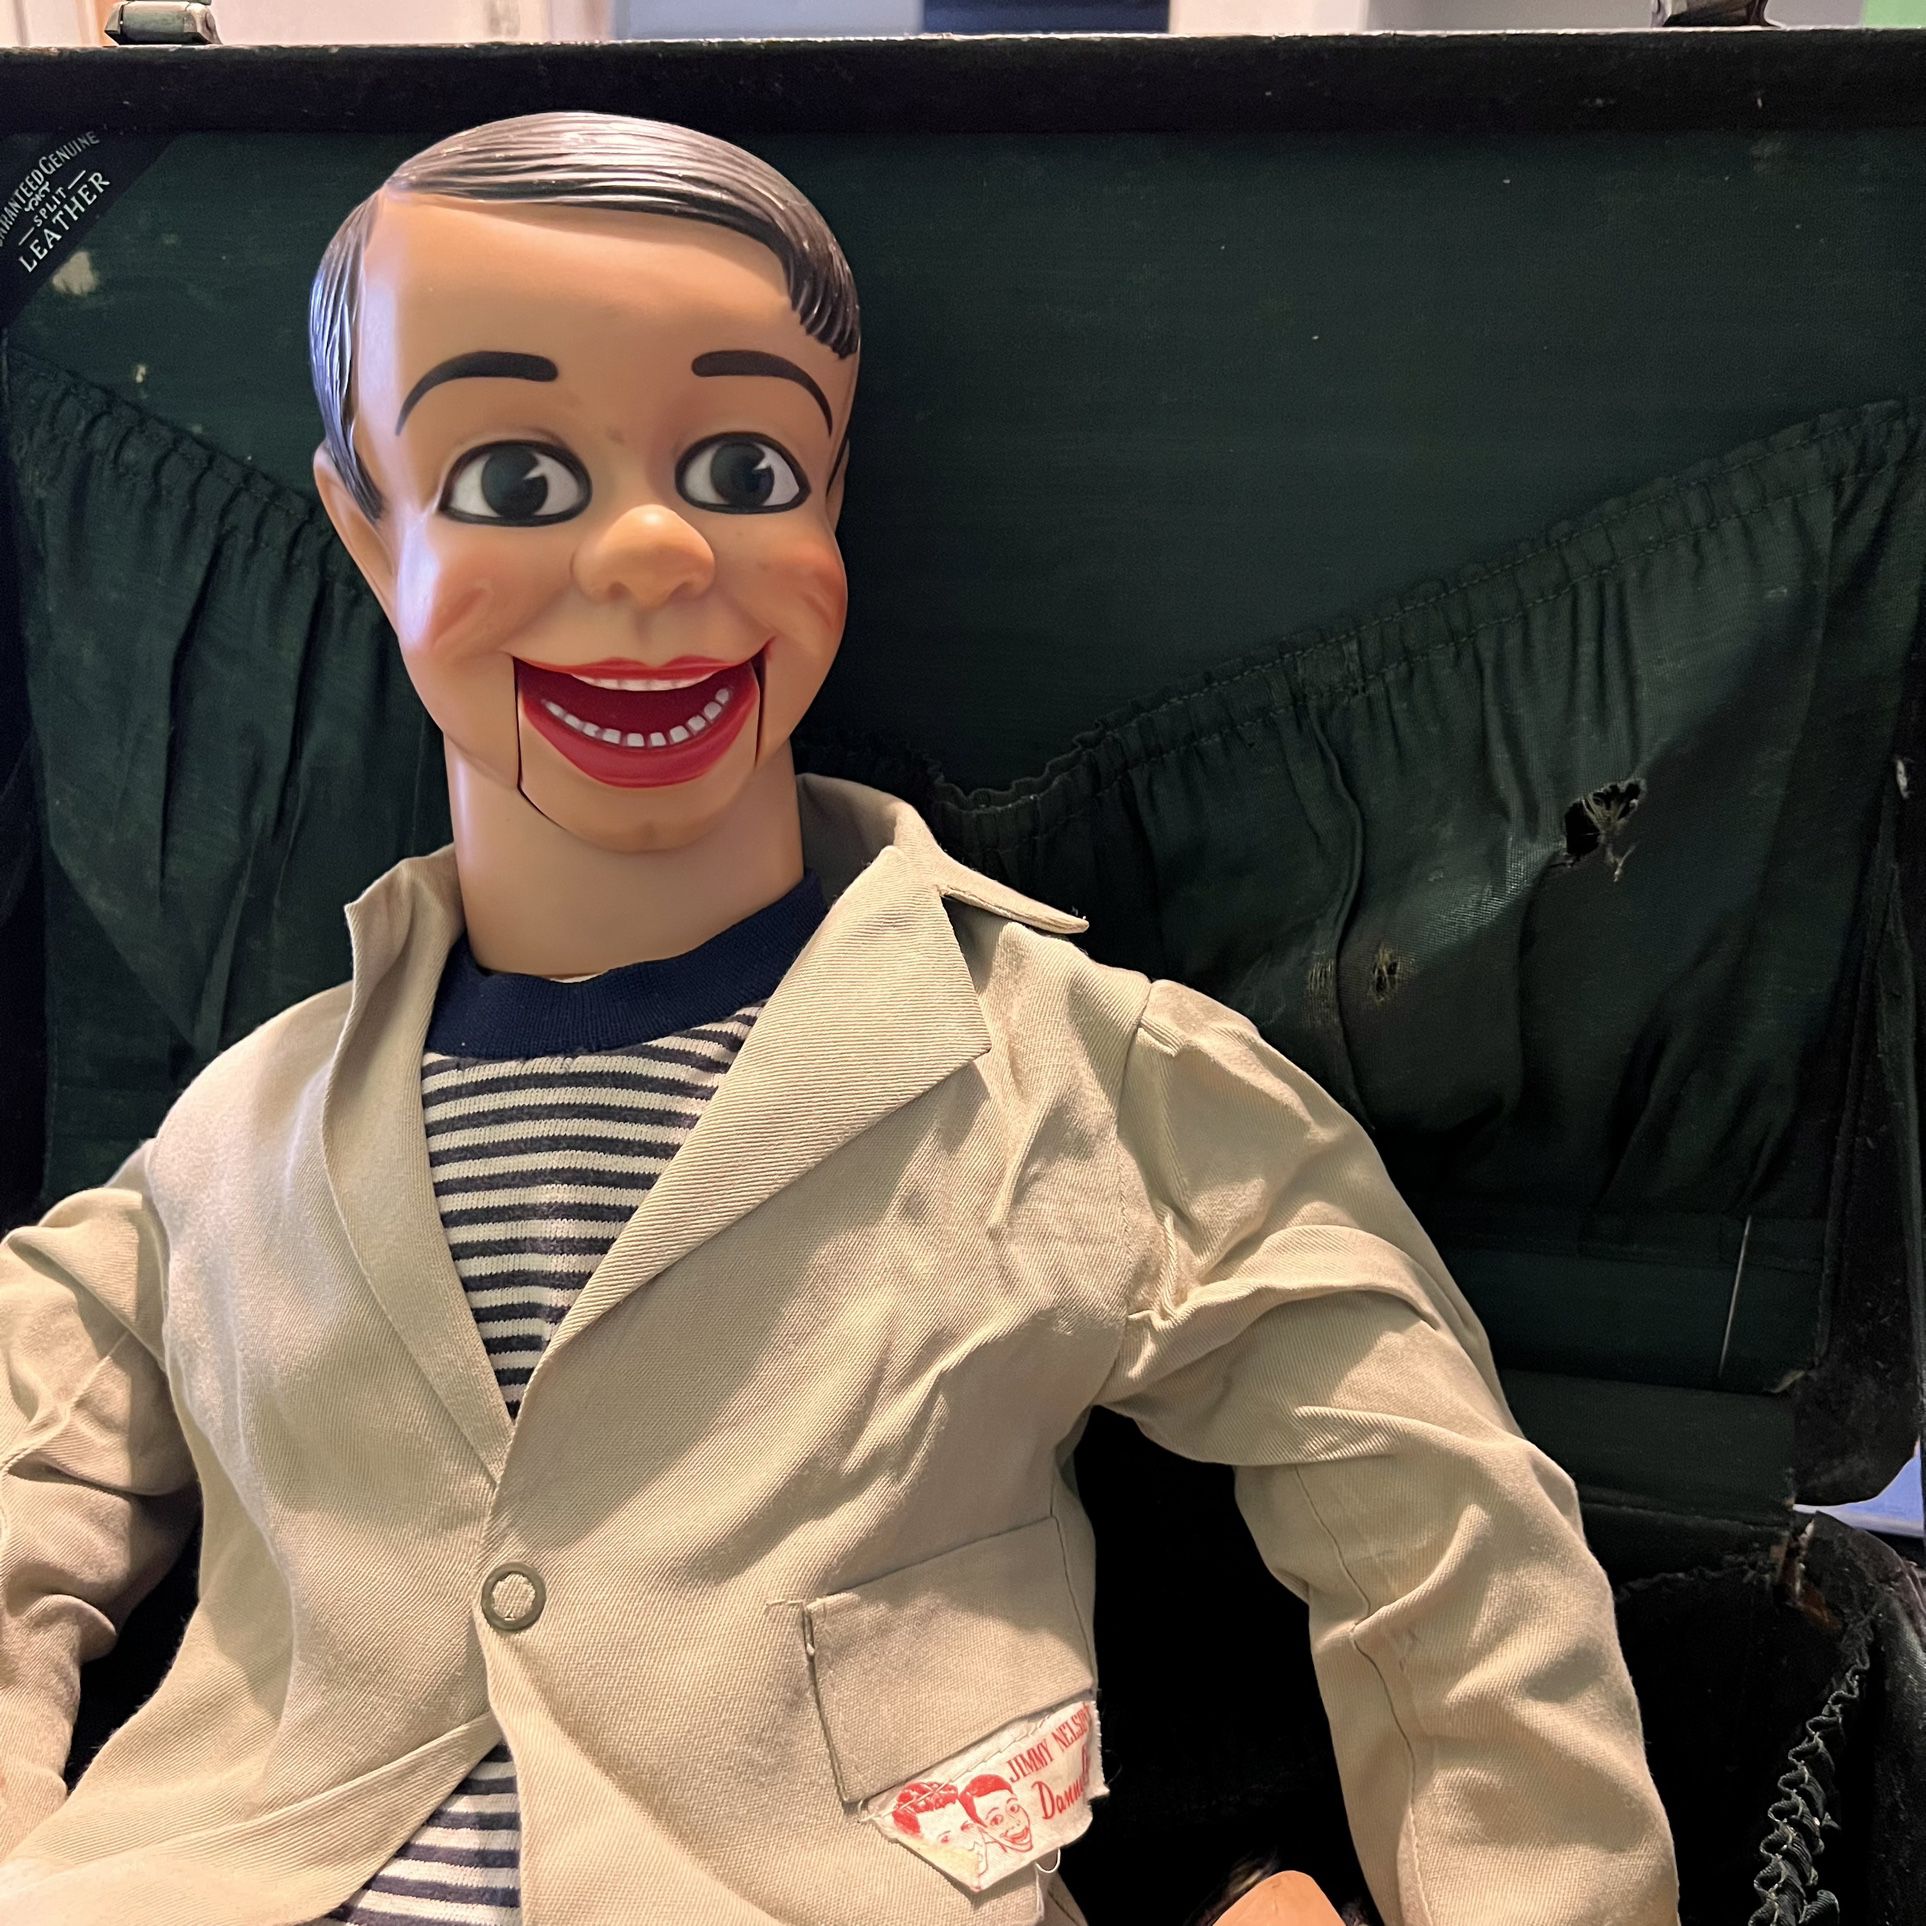 Jimmy Nelson’s Danny O’Day Ventriloquist Dummy